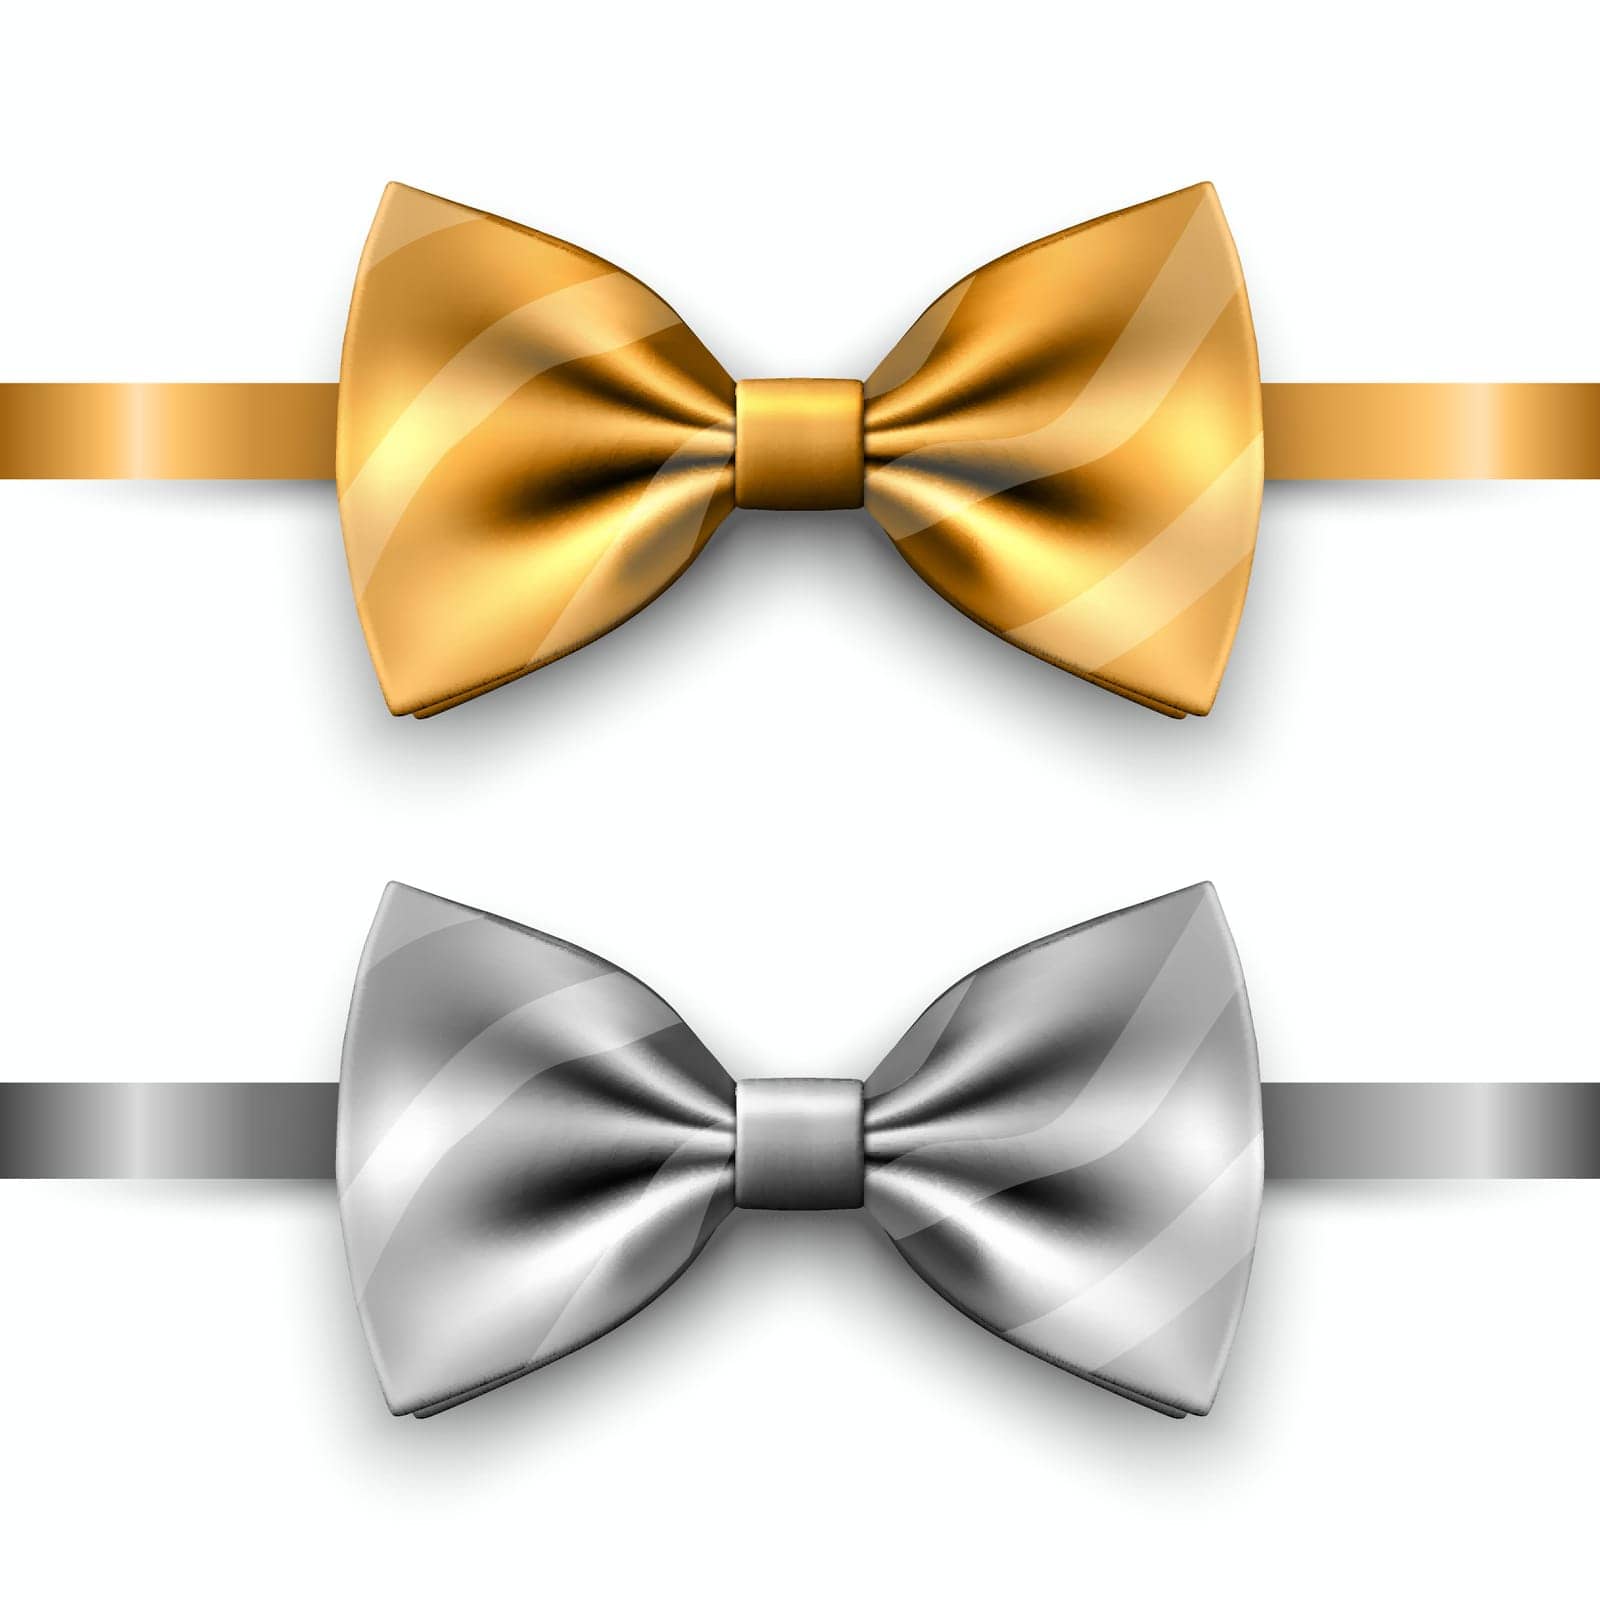 Vector 3D Realistic Golden, Silver Bow Tie Icon Set Closeup Isolated. Silk Glossy Bowtie, Tie Gentleman. Mockup, Design Template of Stylish Bow Tie for Men. Fashion, Father's Day Holiday Concept.